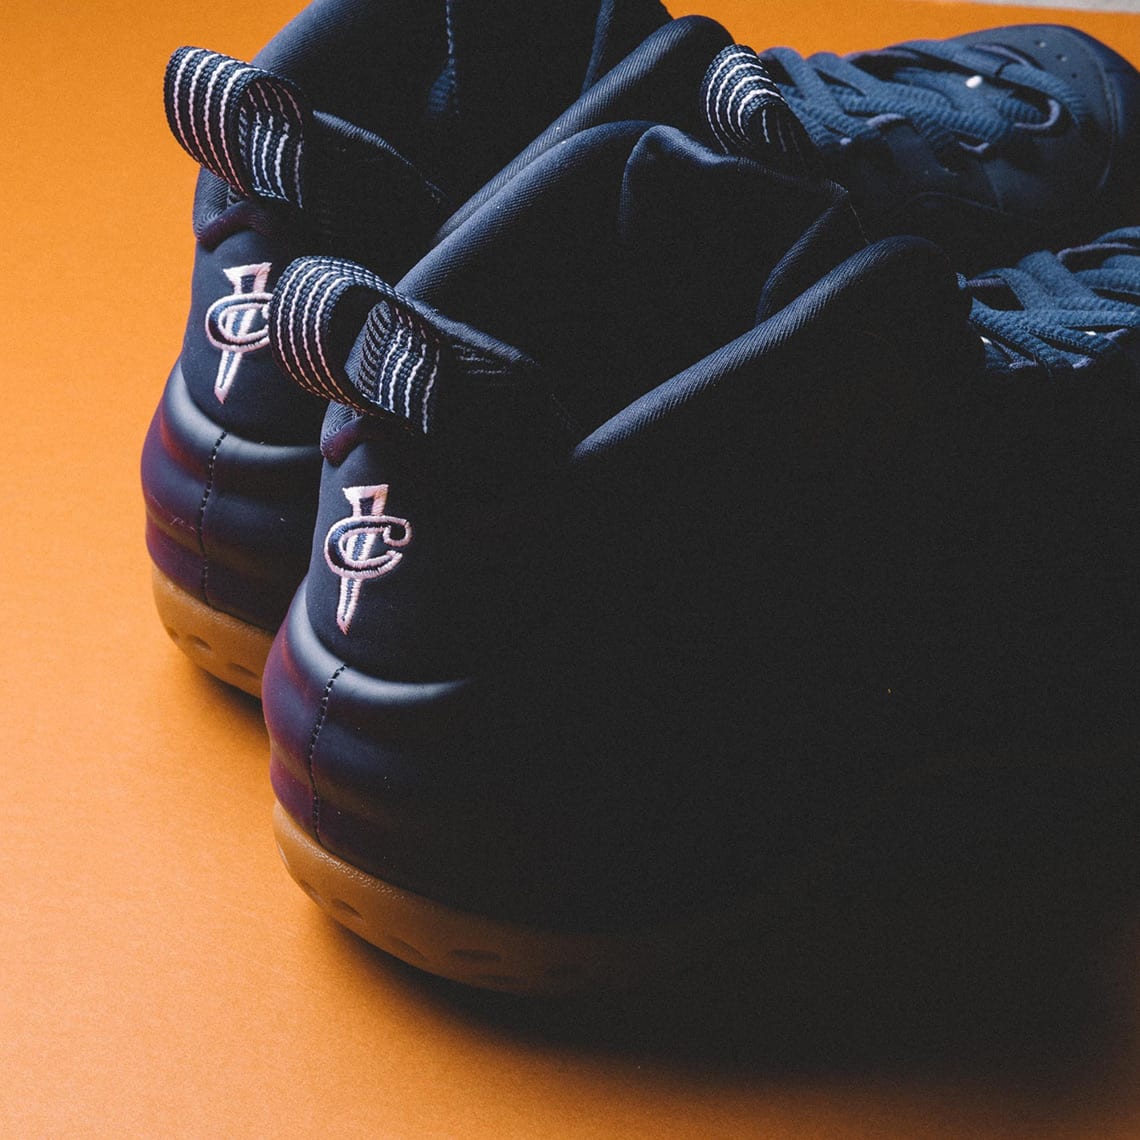 This Nike Air Foamposite One Colorway Proves That Gum Soles Are